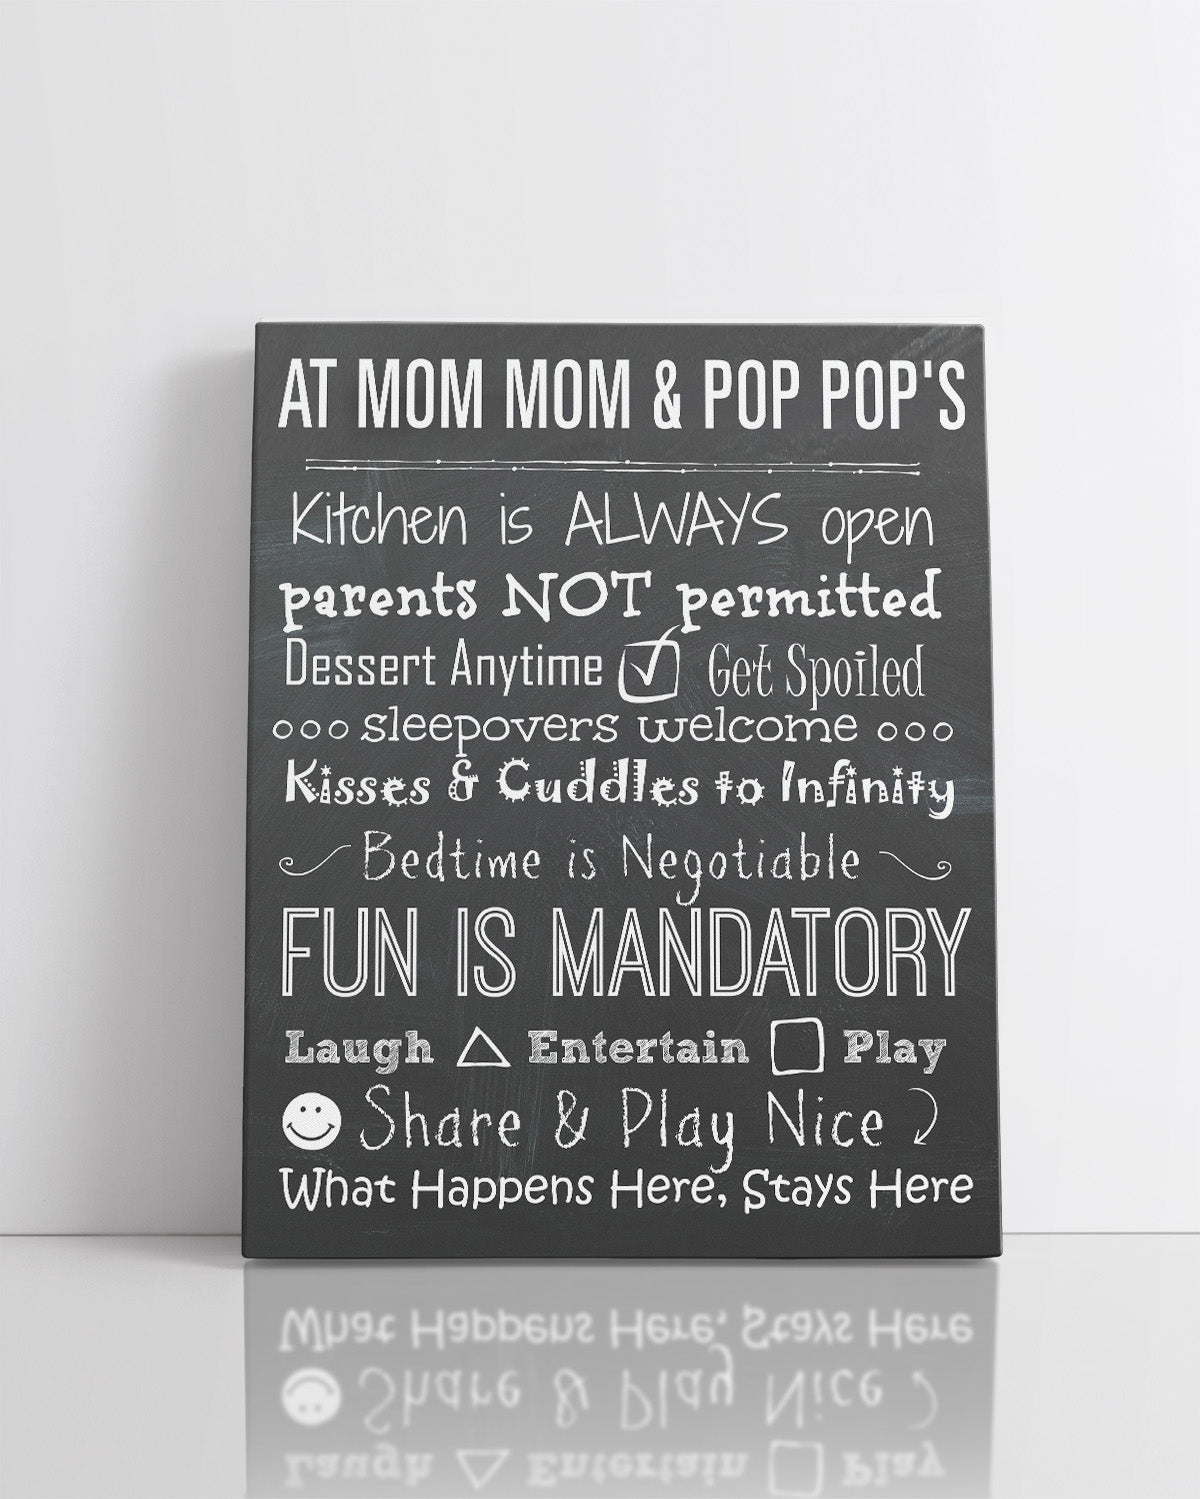 Grandparents House Rules Sign Wall Art Decor - Grandparents Day Gift Ideas - Gifts for Grandparents - Best Gifts for Grandparents Wall Decor